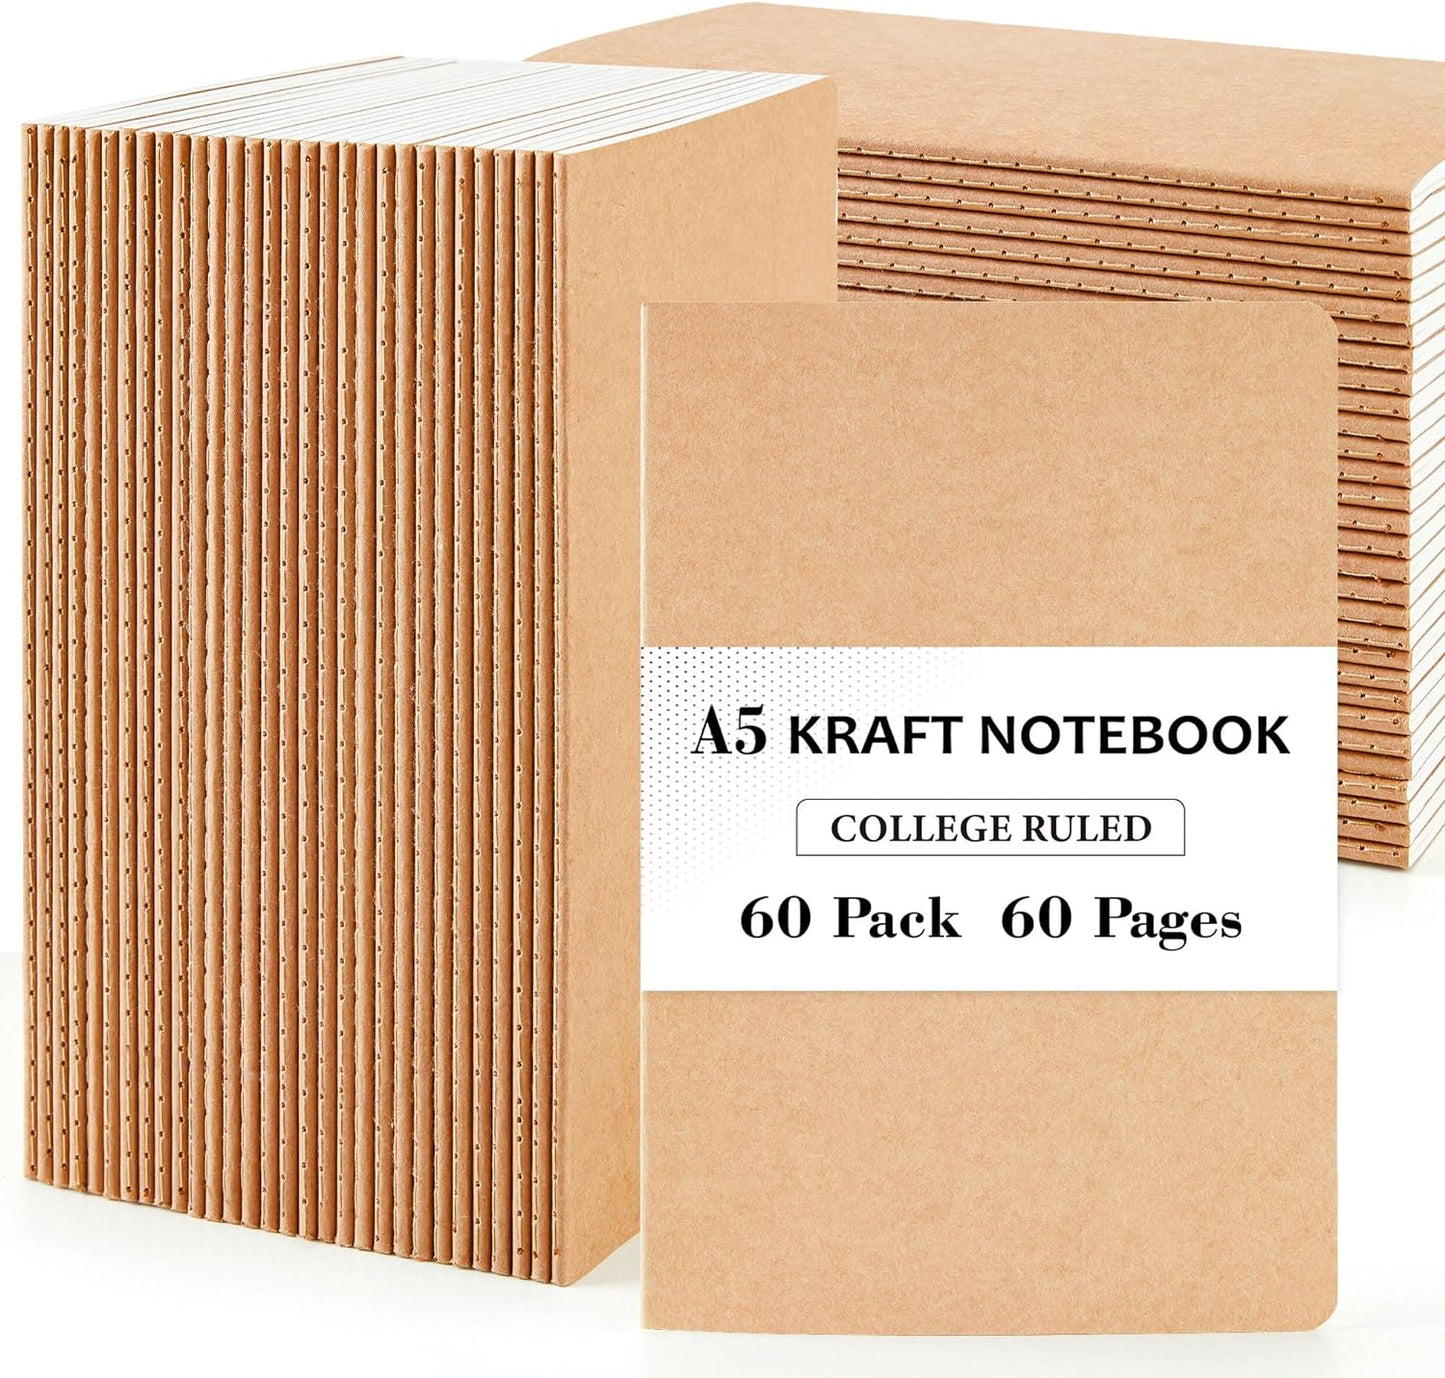 60 Pack Kraft Notebooks Bulk, Lined Travel Journals Note Pad Notebooks for Men Women Girls Students, Making Plans Writing Memos Office School Supplies, A5, 60 Pages, 8.3” X 5.5”